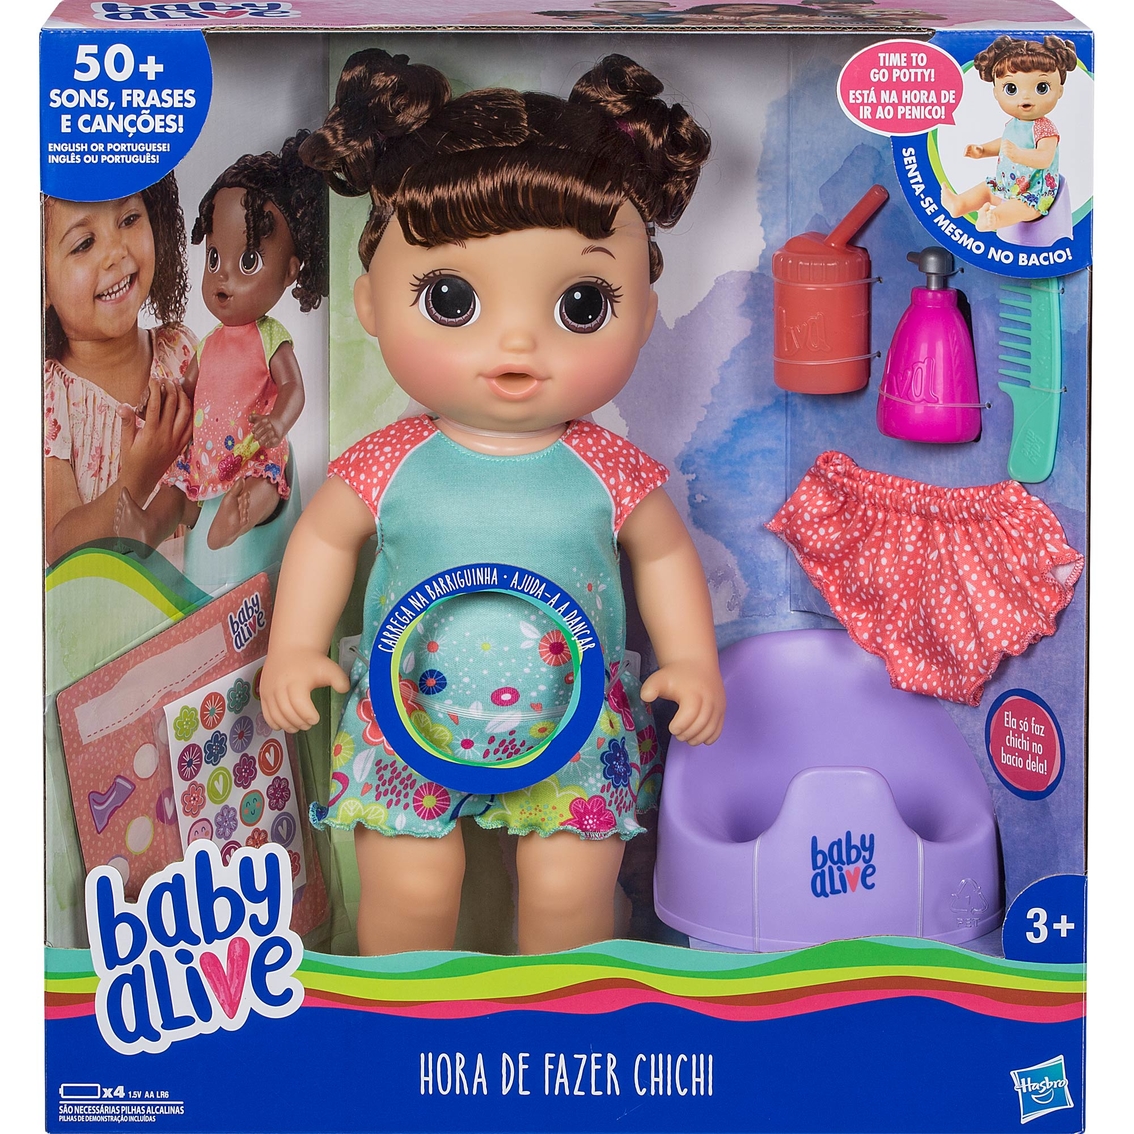 baby alive doll that blinks